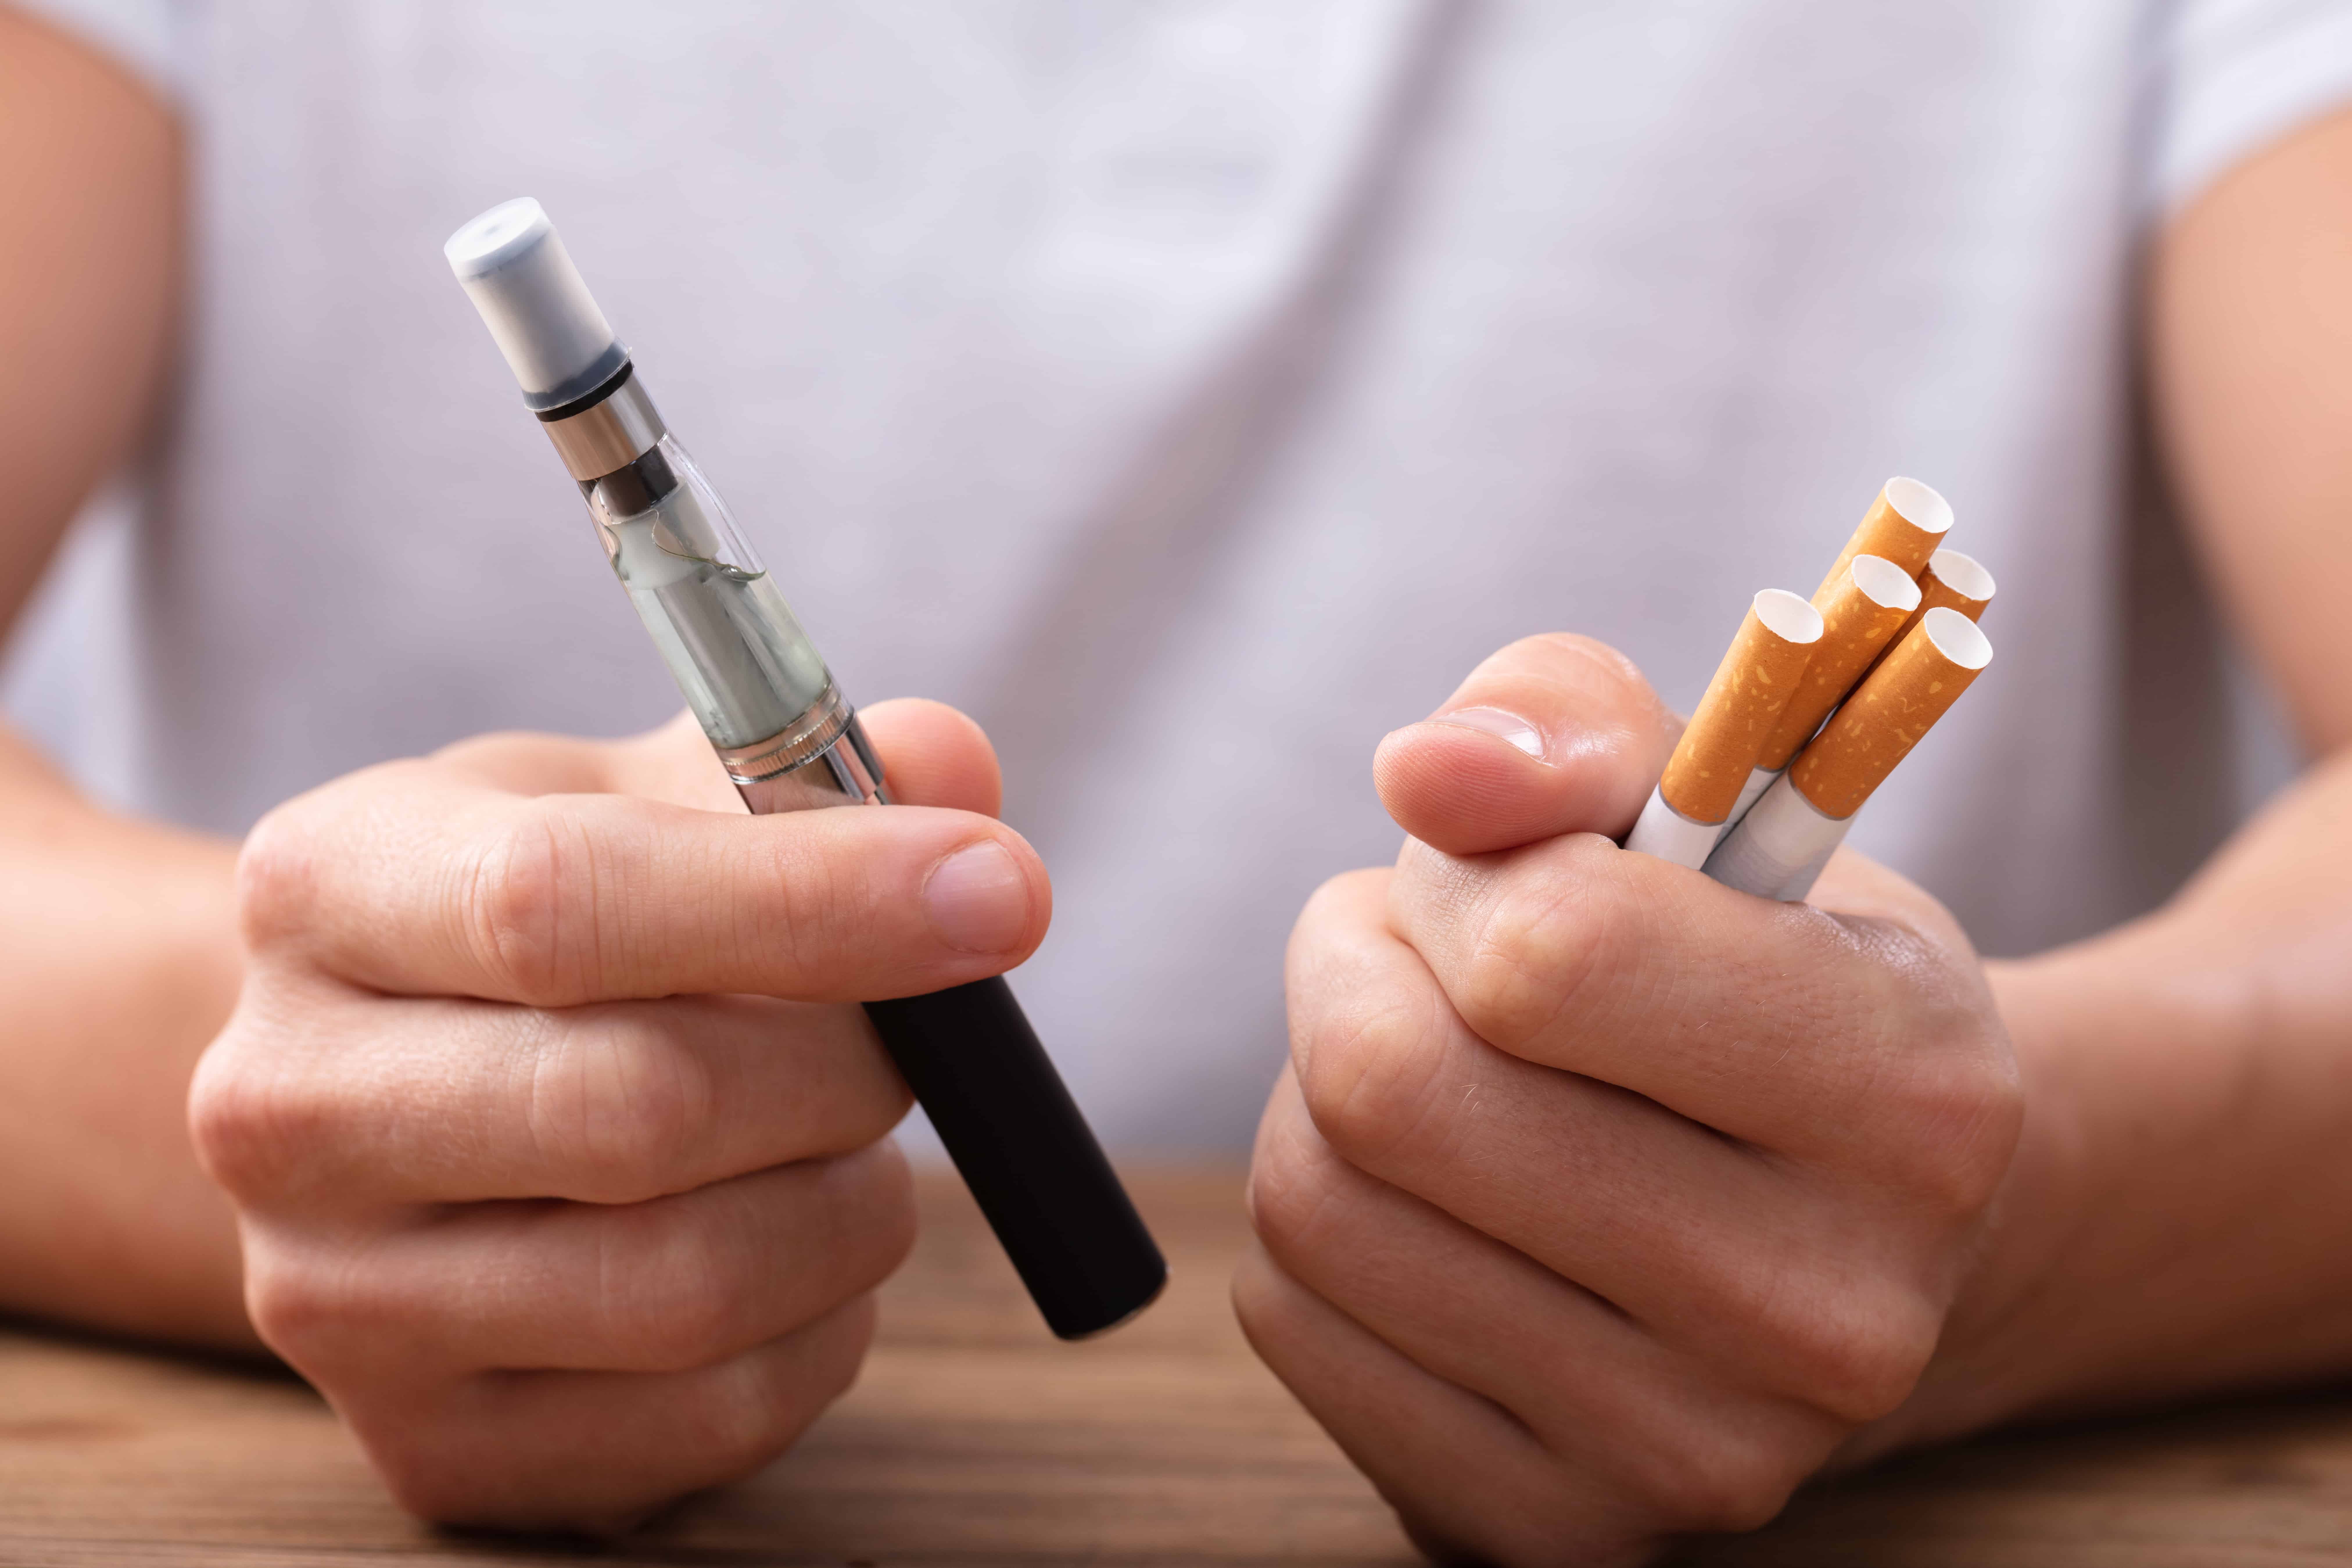 New Journal Article Observes Effect of COVID-19 on Tobacco Use